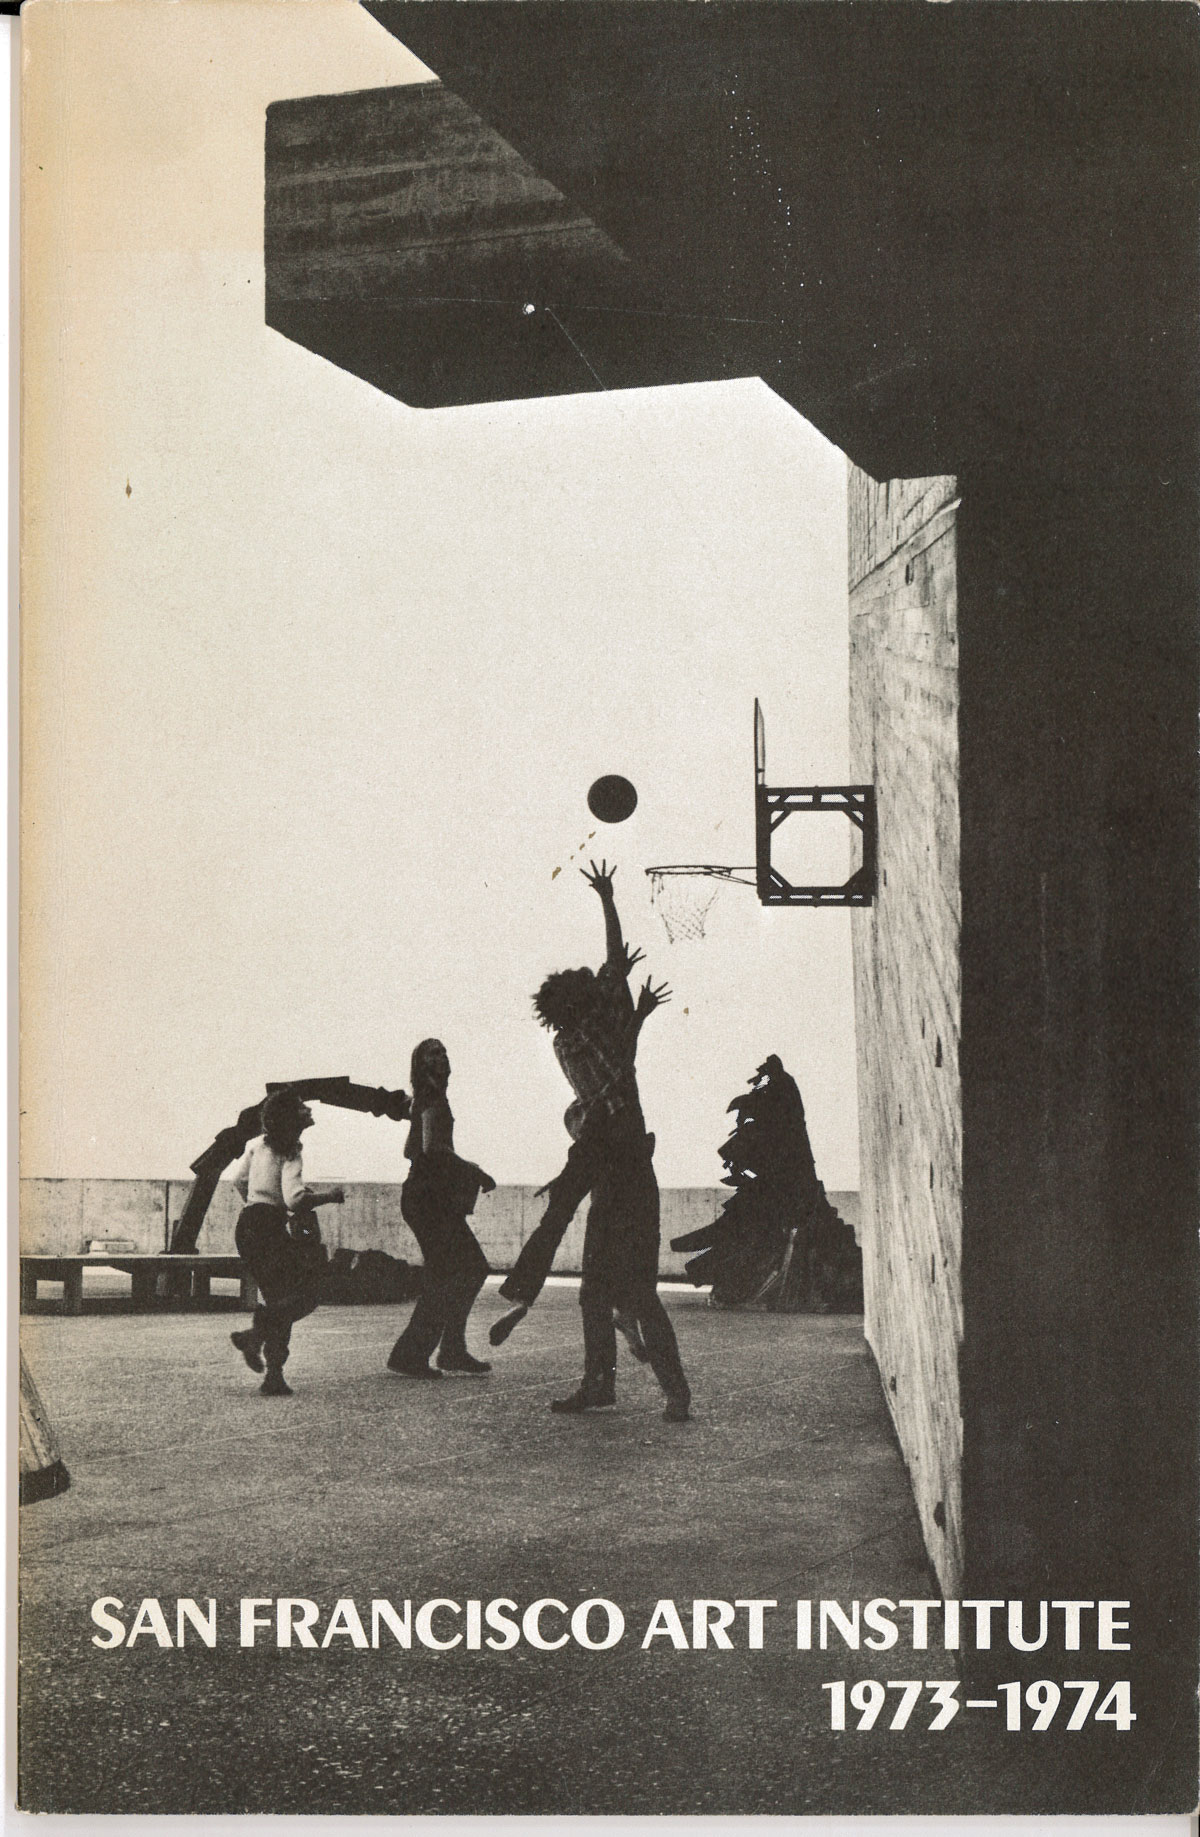 Booklet cover with text over black and white photograph of students playing basketball on brutalist campus